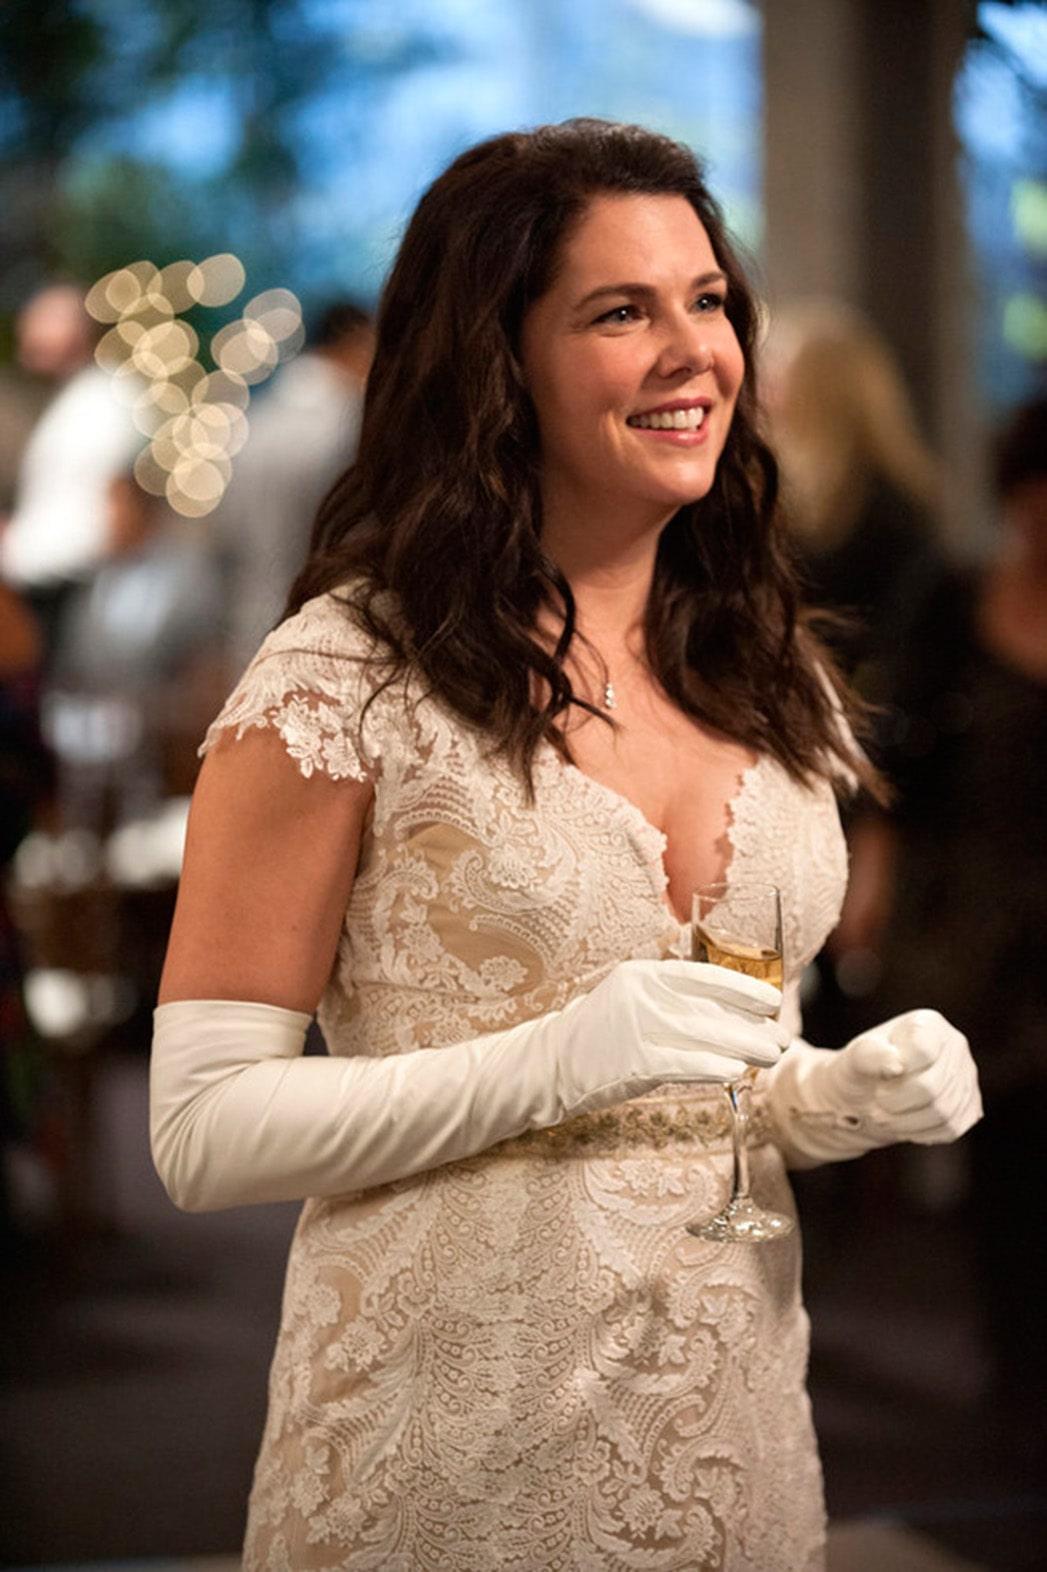 60+ Hottest Lauren Helen Graham Boobs Pictures Are Here To Make You All Sweaty With Her Hotness | Best Of Comic Books